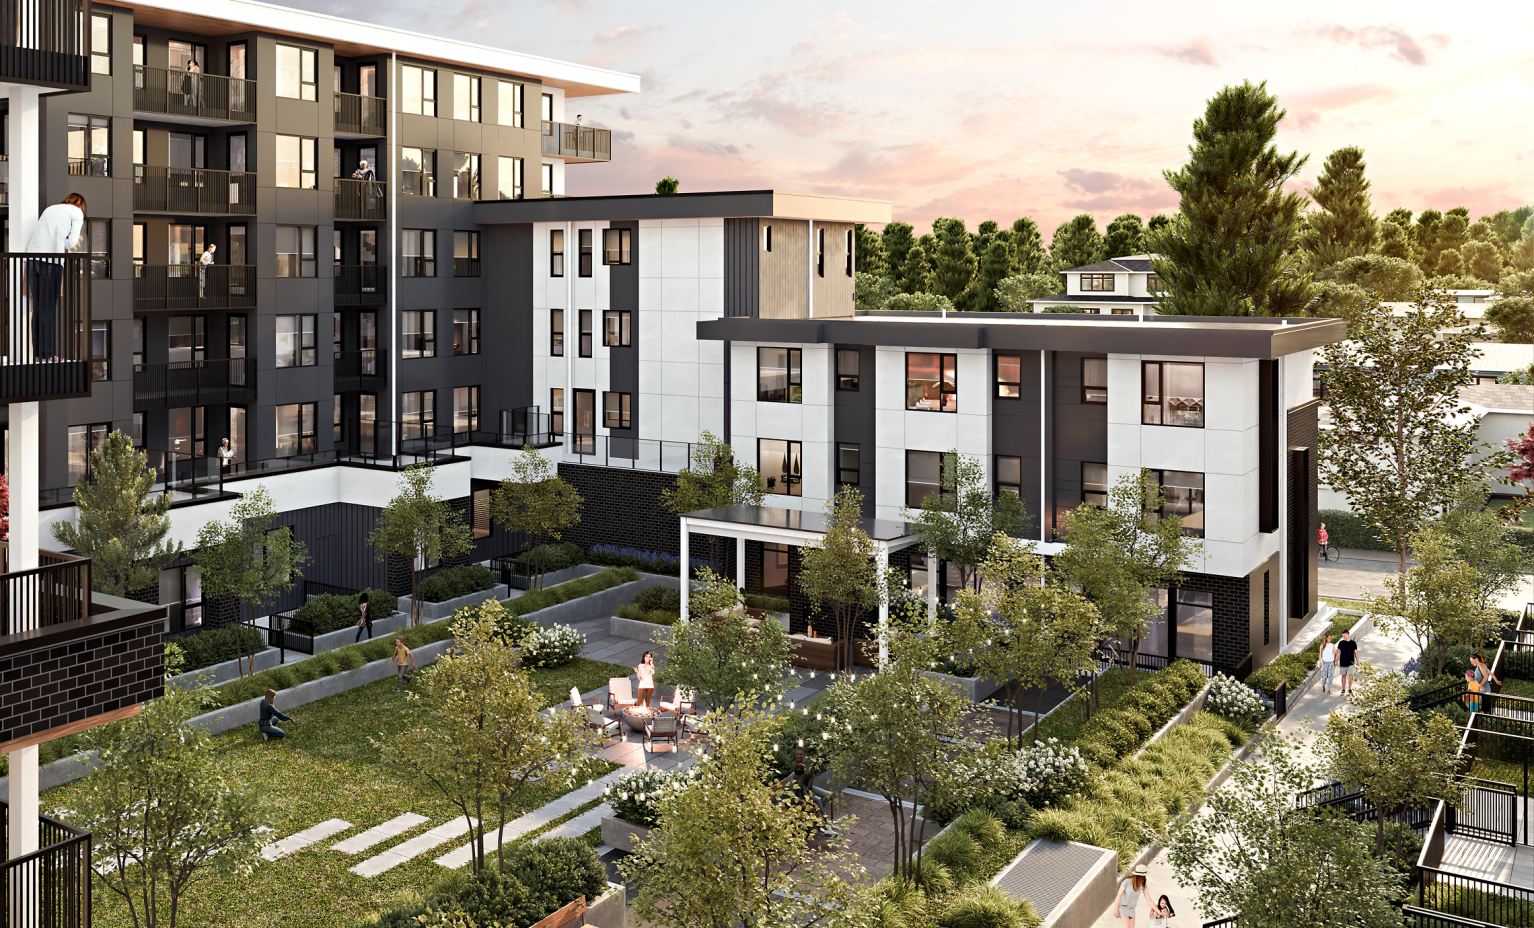 Introducing Halo: Where West Coast Living Meets Urban Charm